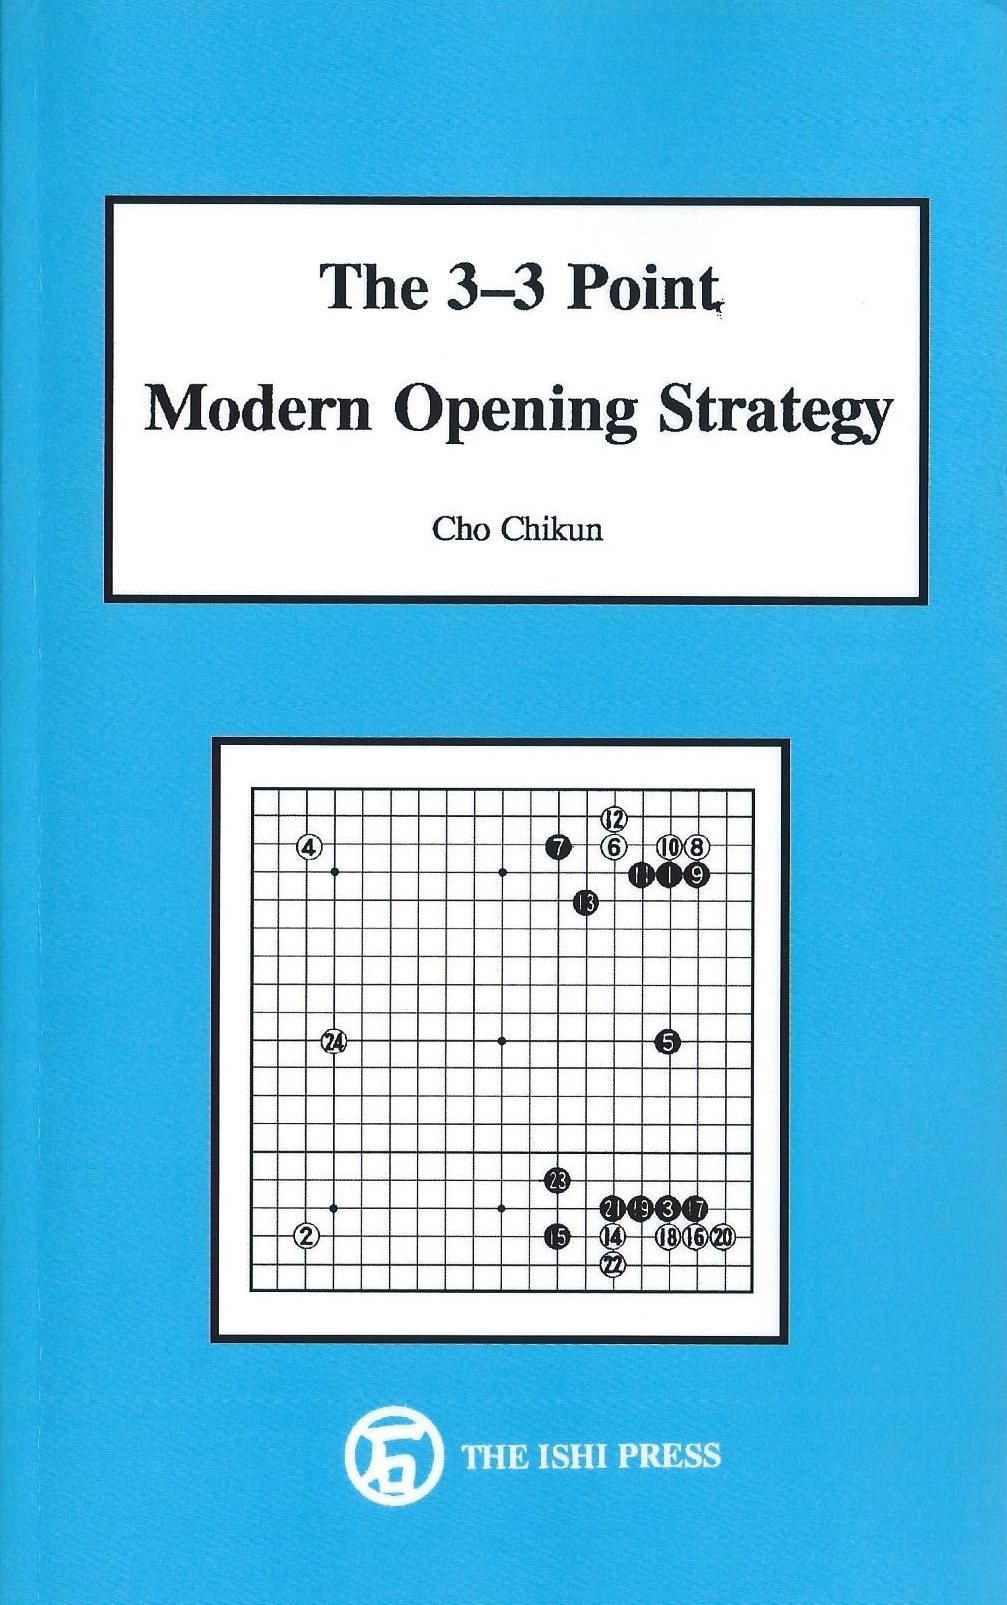 G44 The 3-3 Point - Modern Opening Strategy, Cho Chikun